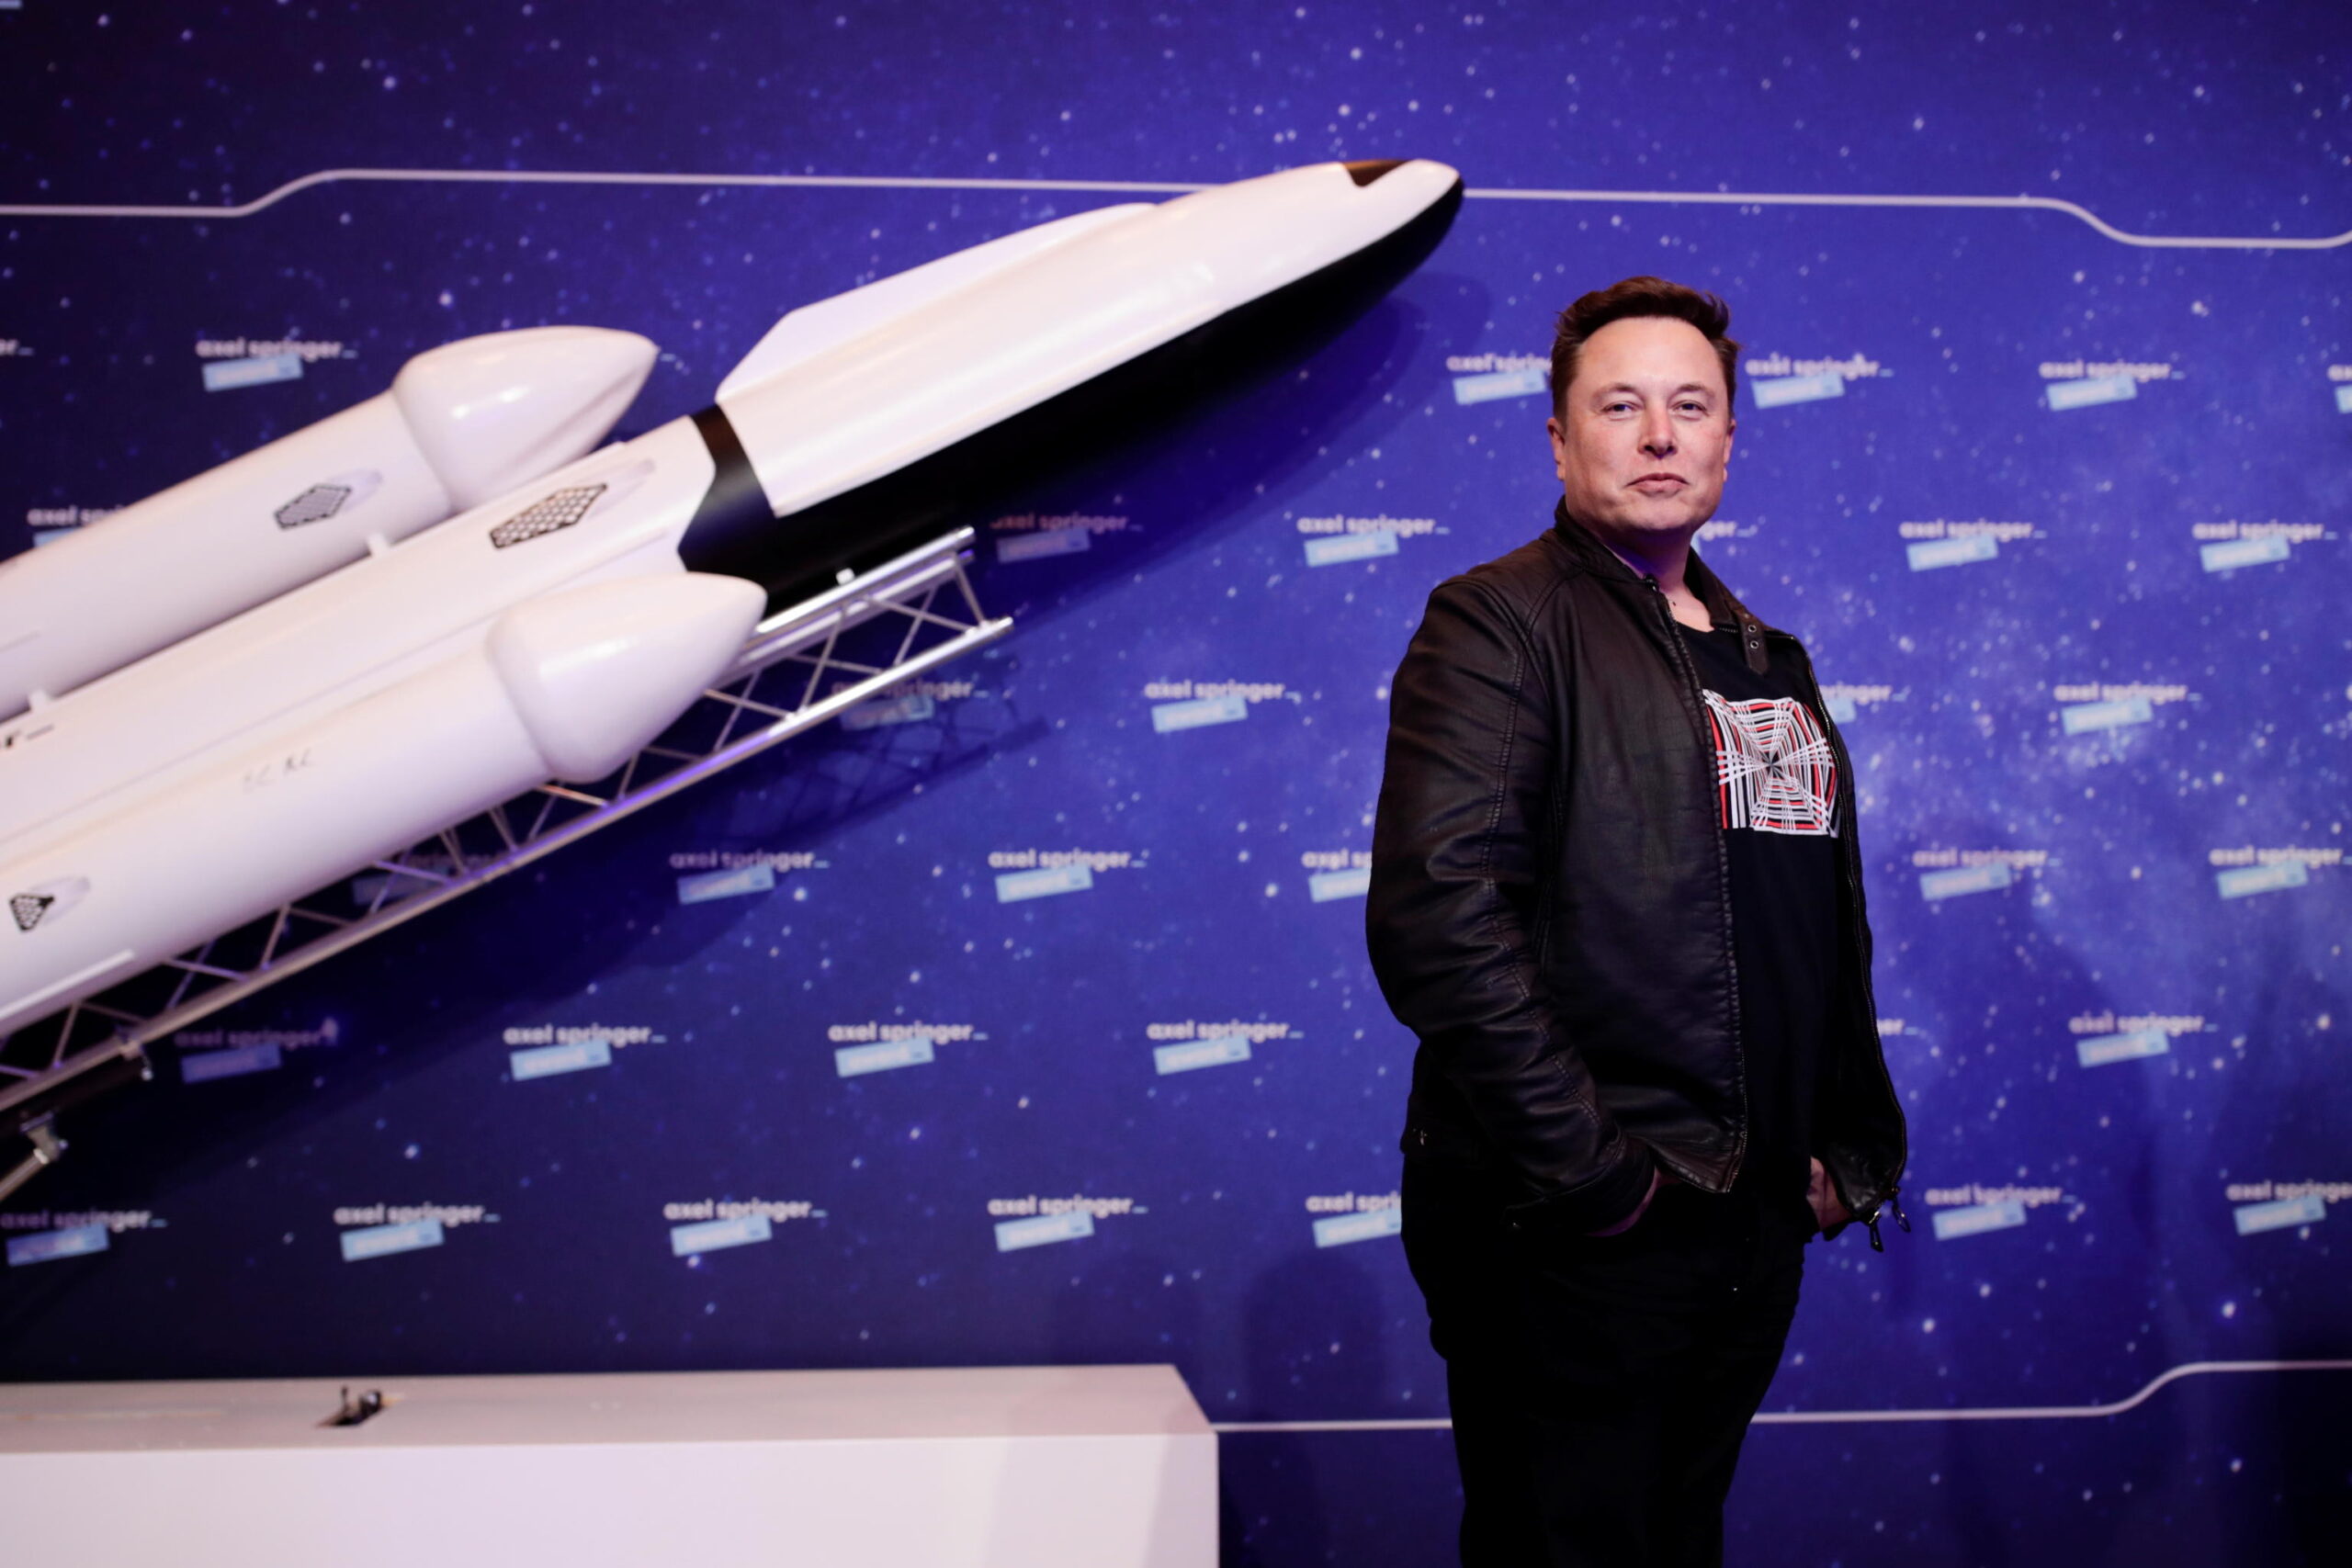 epa08855465 SpaceX owner and Tesla CEO Elon Musk poses after arriving on the red carpet for the Axel Springer award, in Berlin, Germany, 01 December 2020.  EPA/HANNIBAL HANSCHKE / POOL